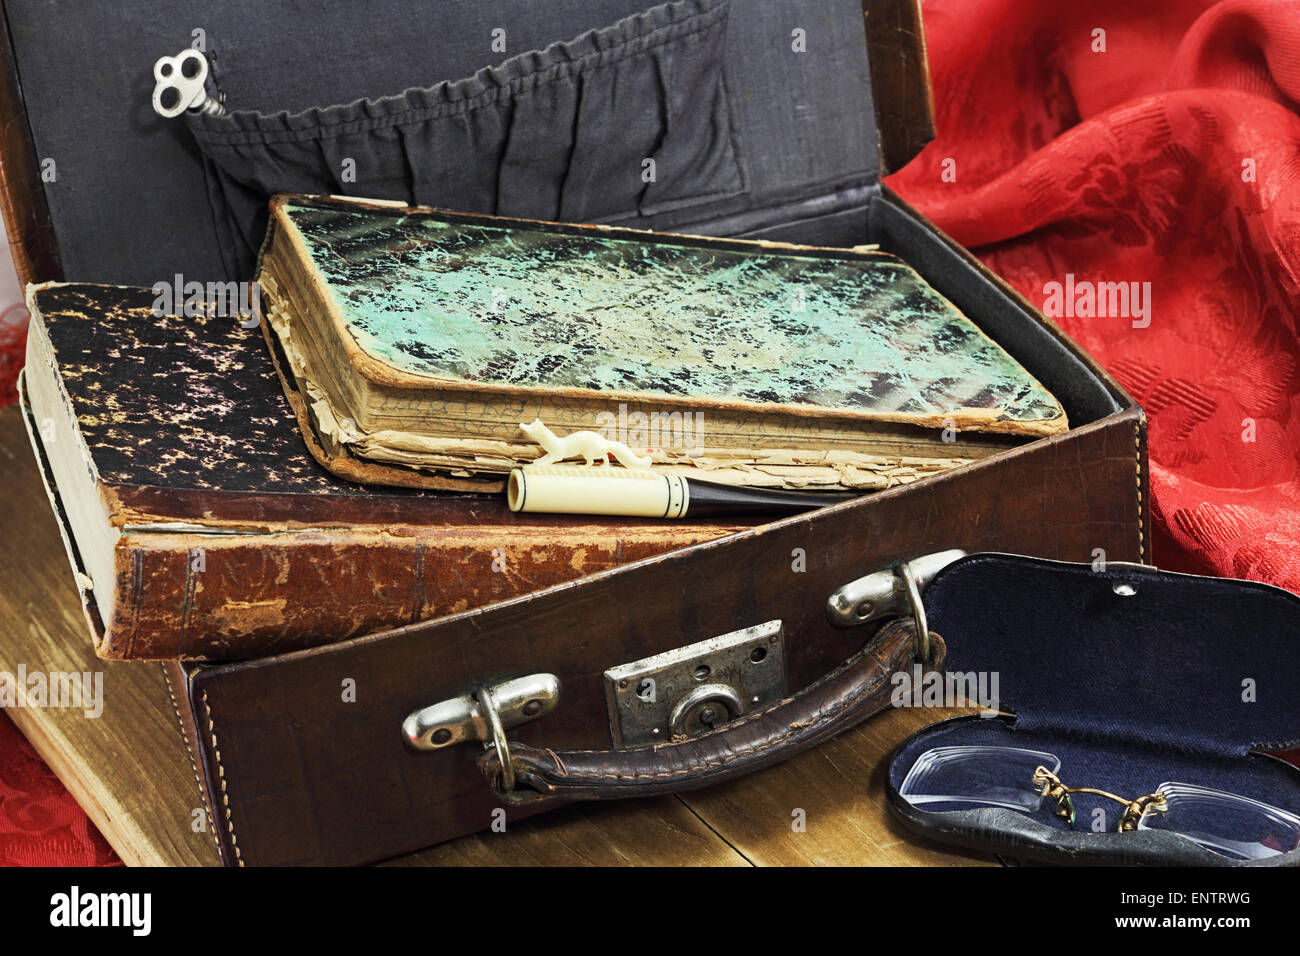 Old books, ivory cigarette holder, key and pince-nez in a retro suitcase Stock Photo